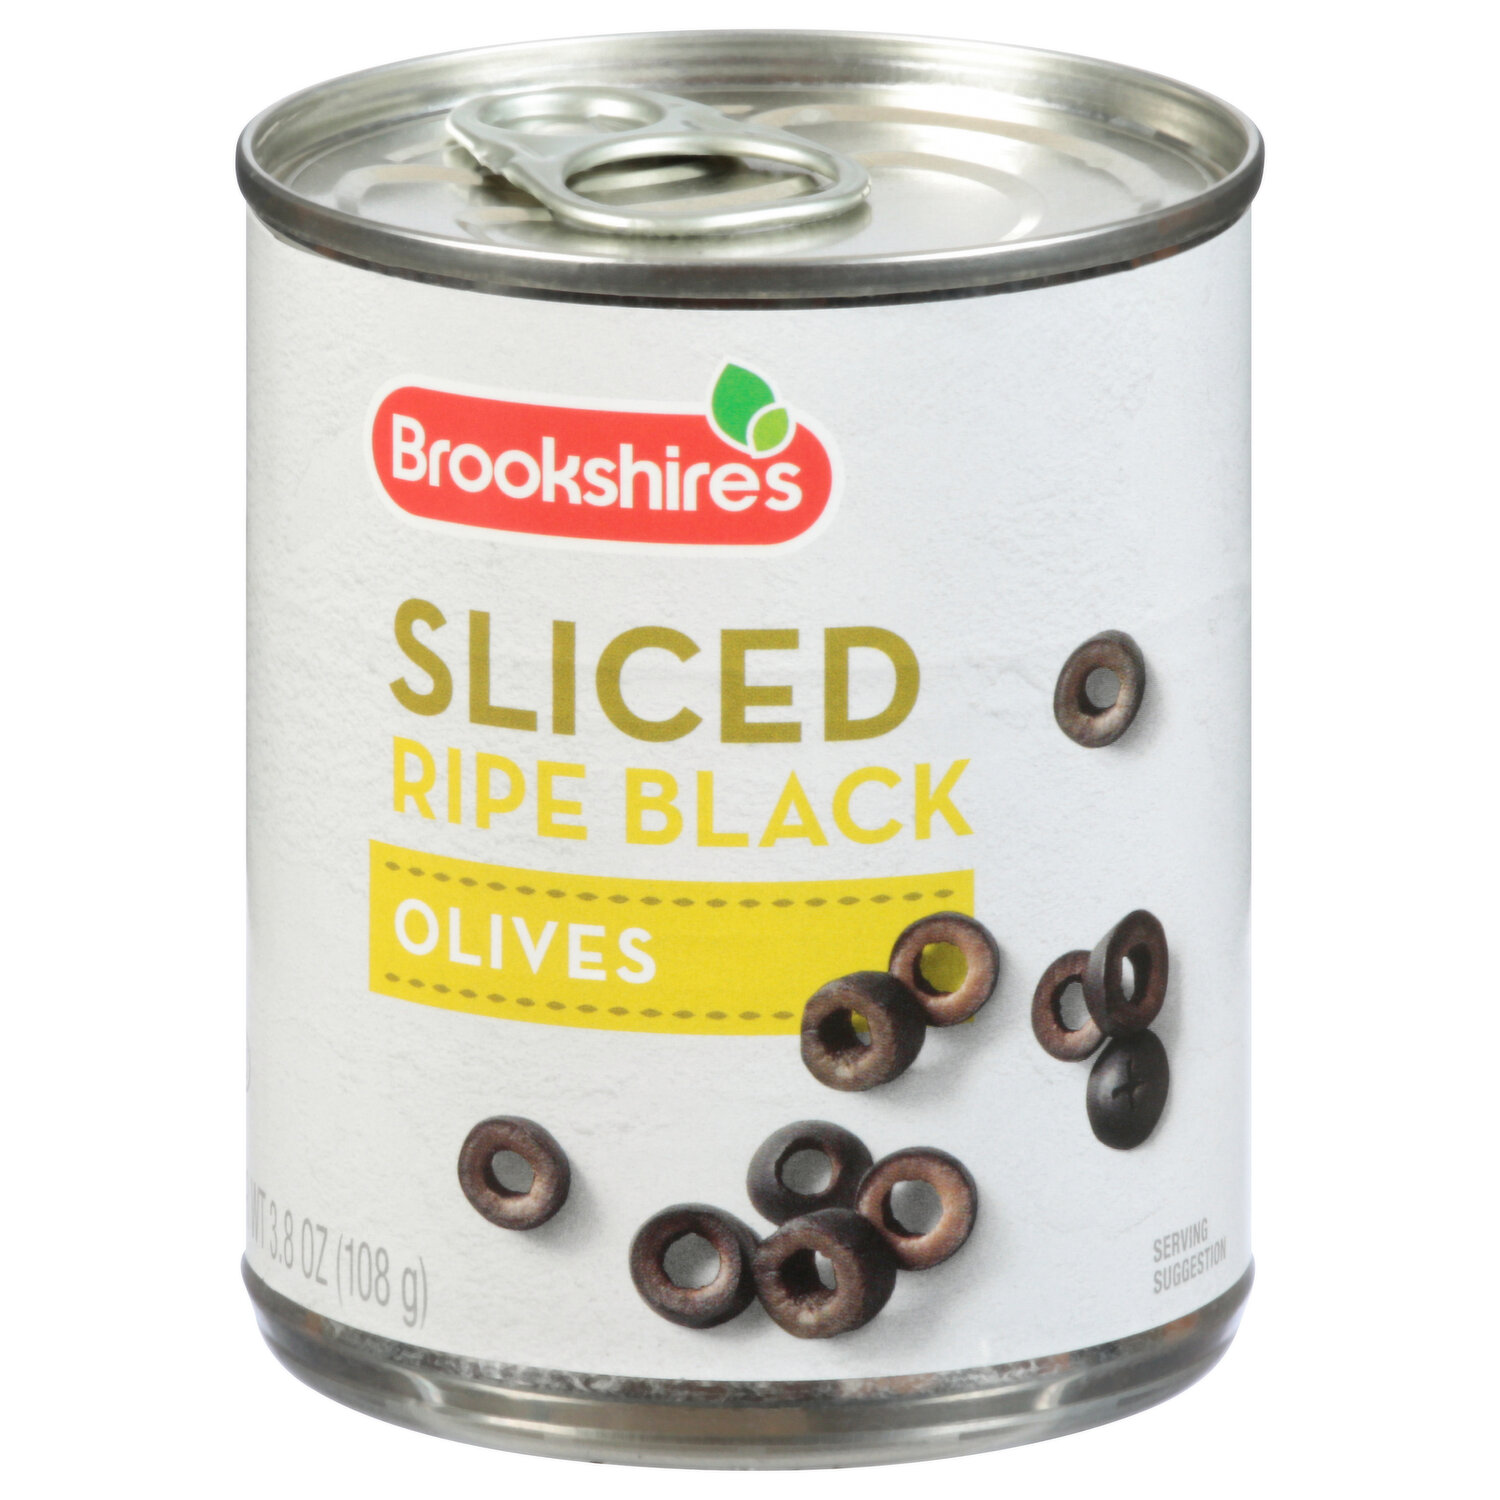 Imported Black Ripe Olives - Orleans Packing